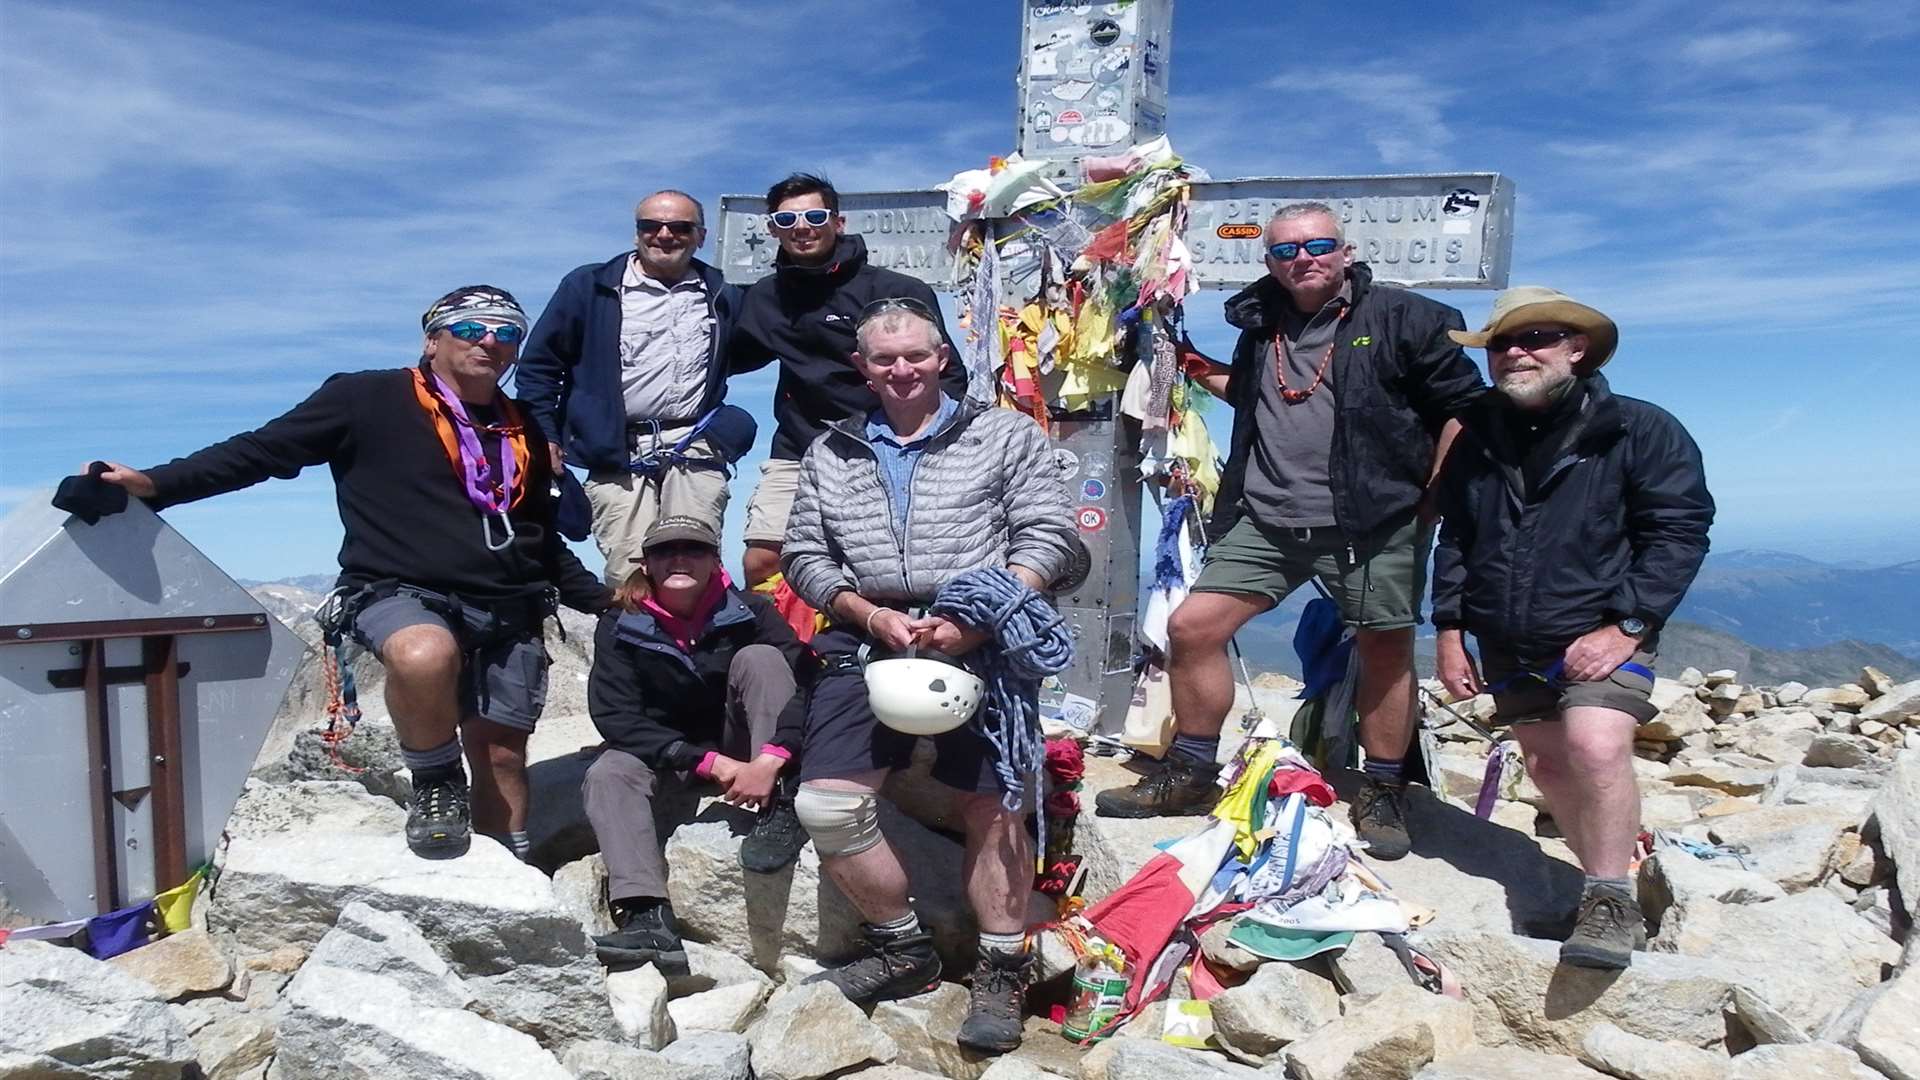 Jim Kerr (left) and the team at the summit of Aneto